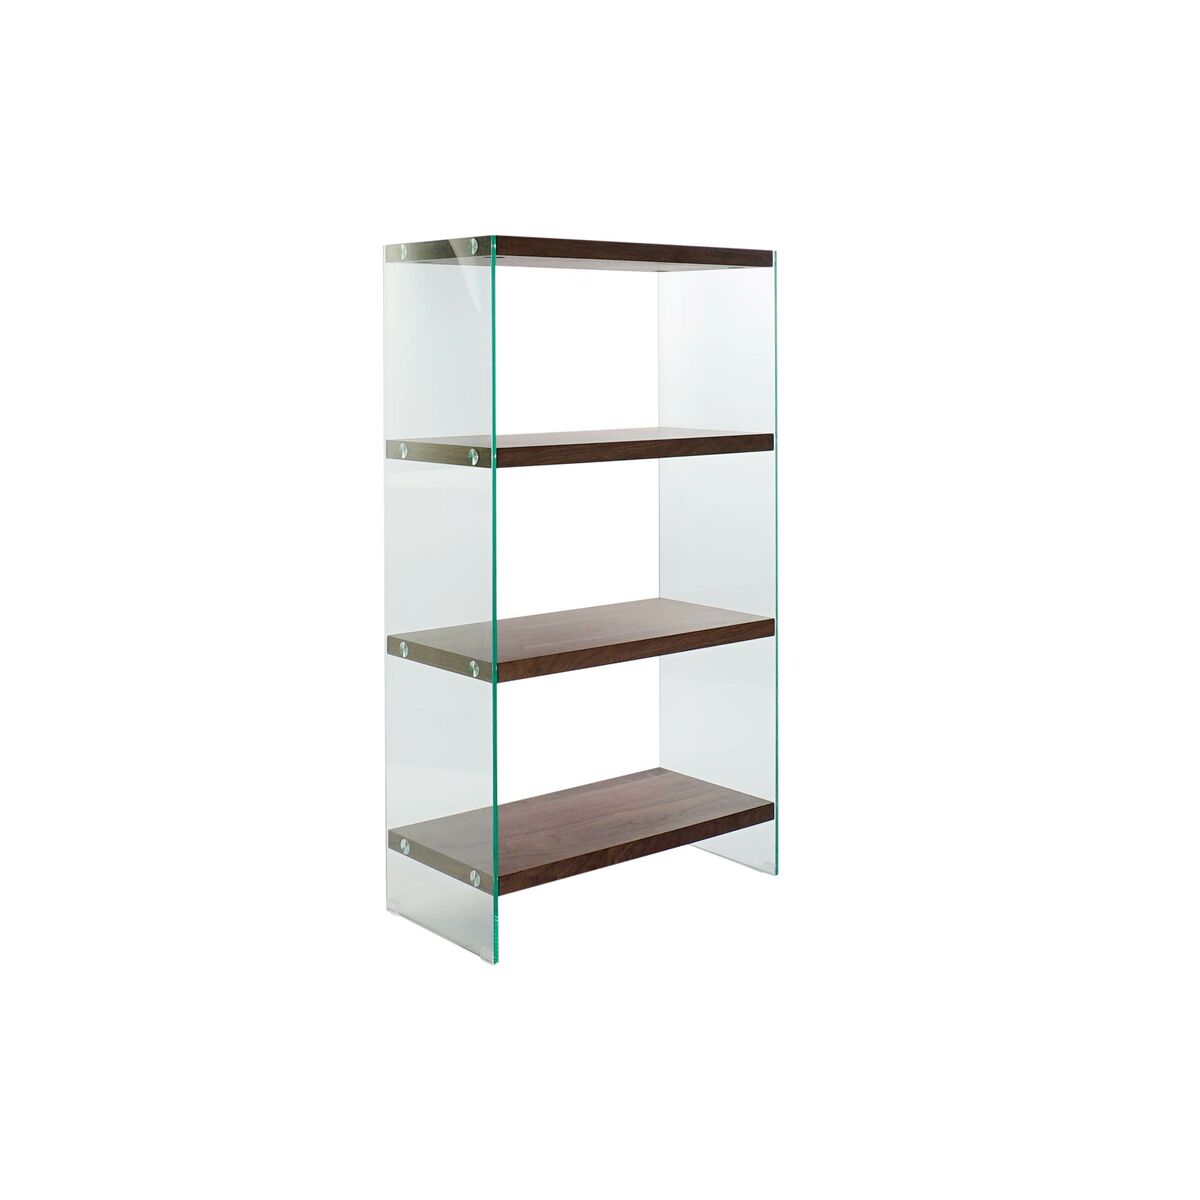 Dark Brown Shelving Unit in Wood and Glass (80 x 40 x 150 cm)